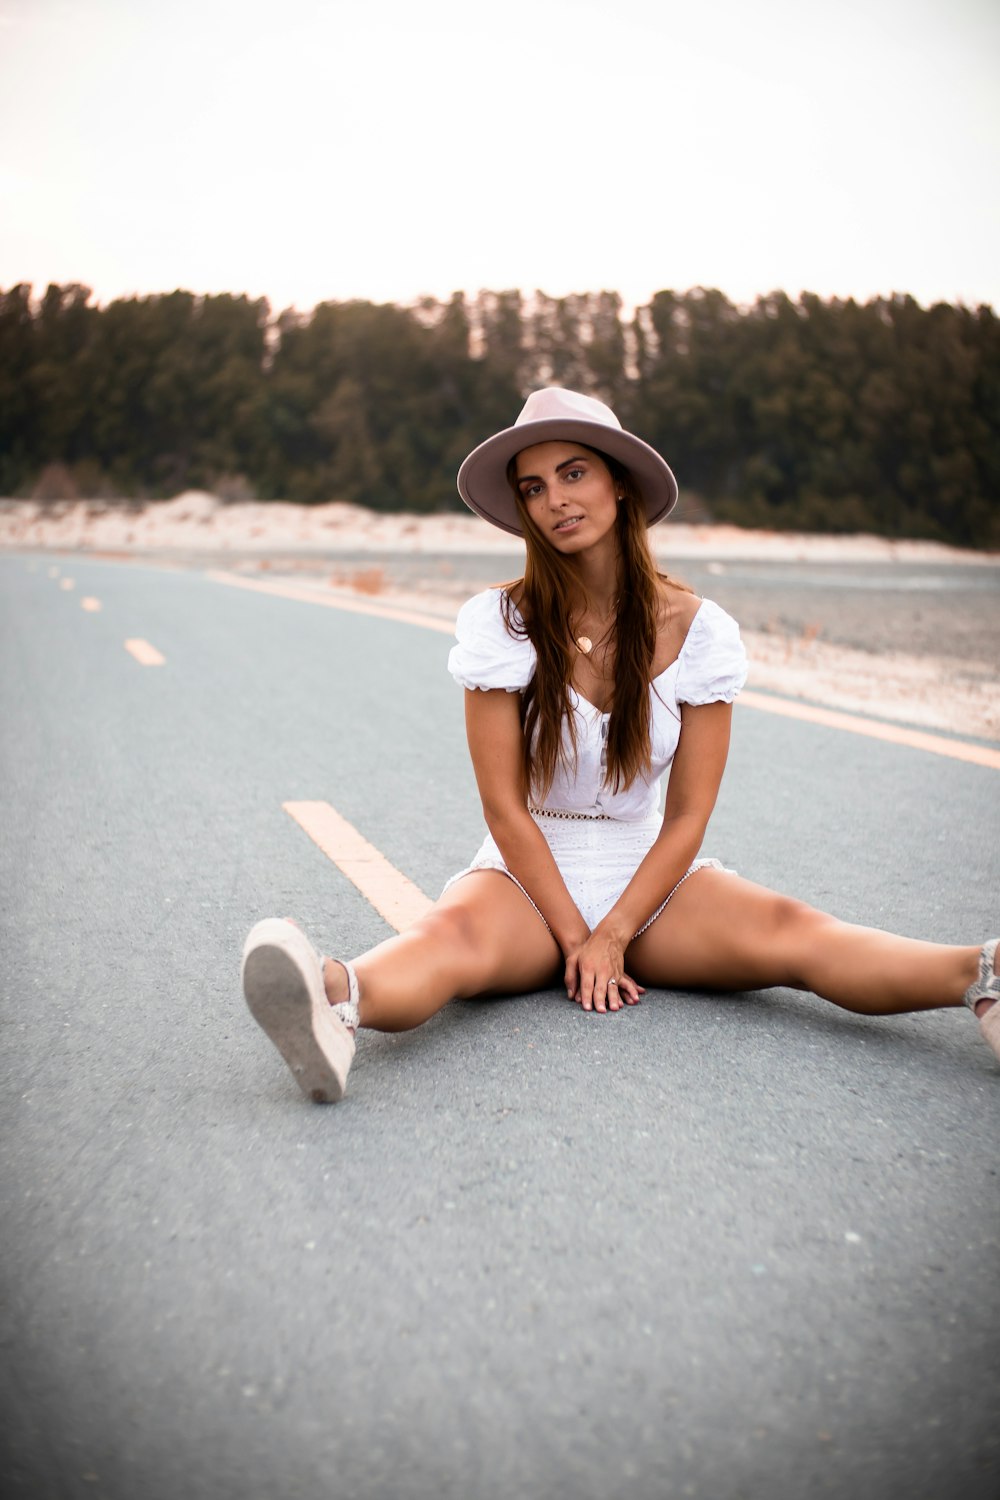 woman in white dress and brown hat sitting on gray asphalt road during daytime